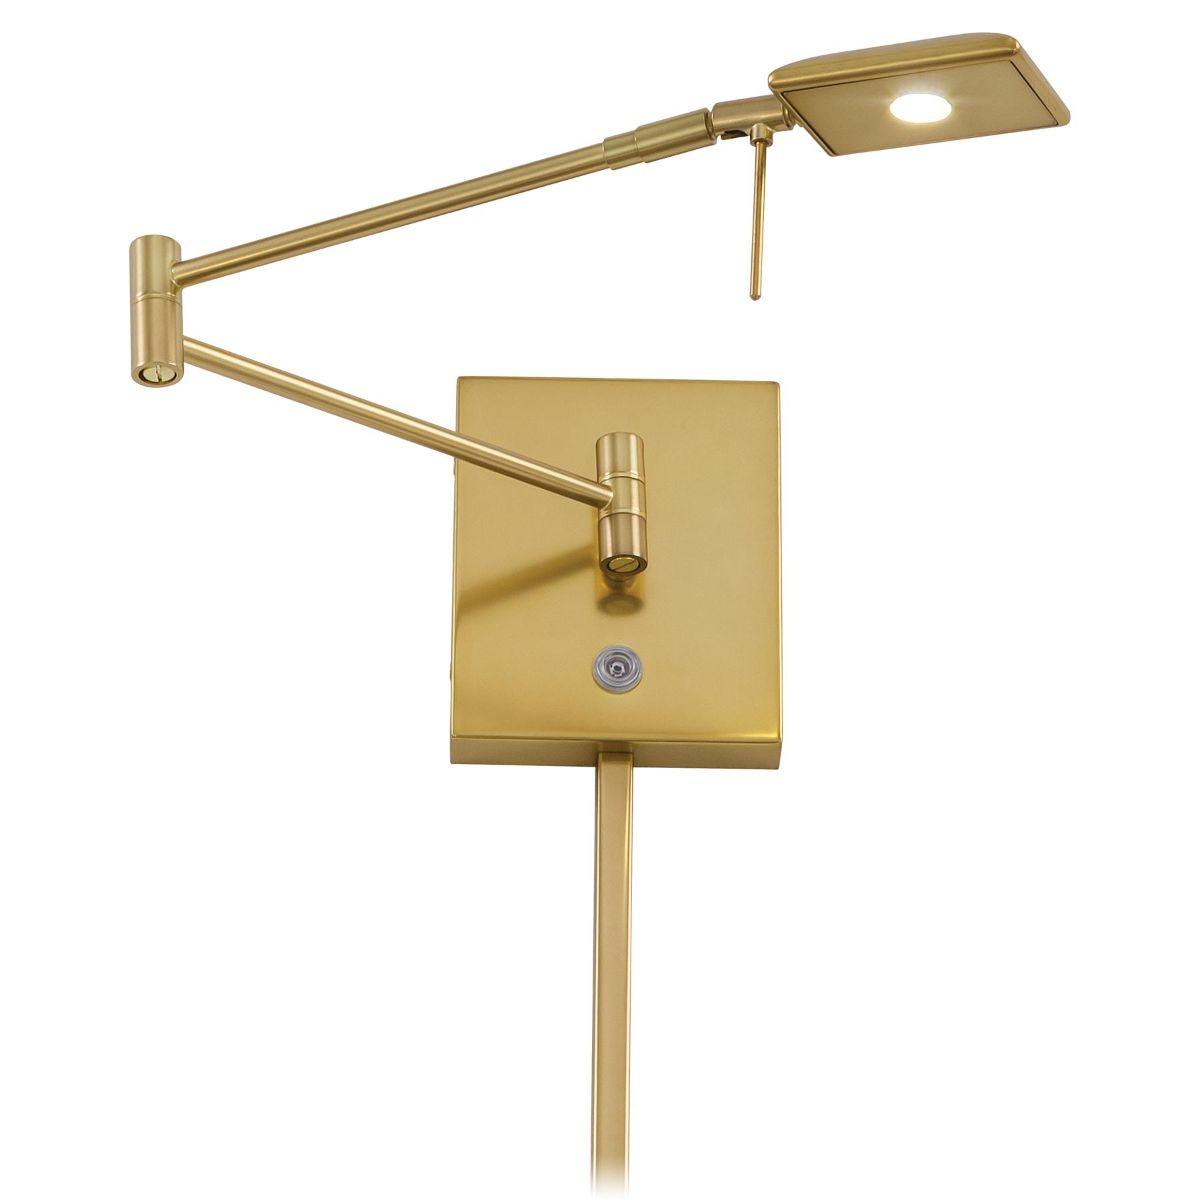 George's Reading Room Contemporary LED Swing Arm Wall Lamp